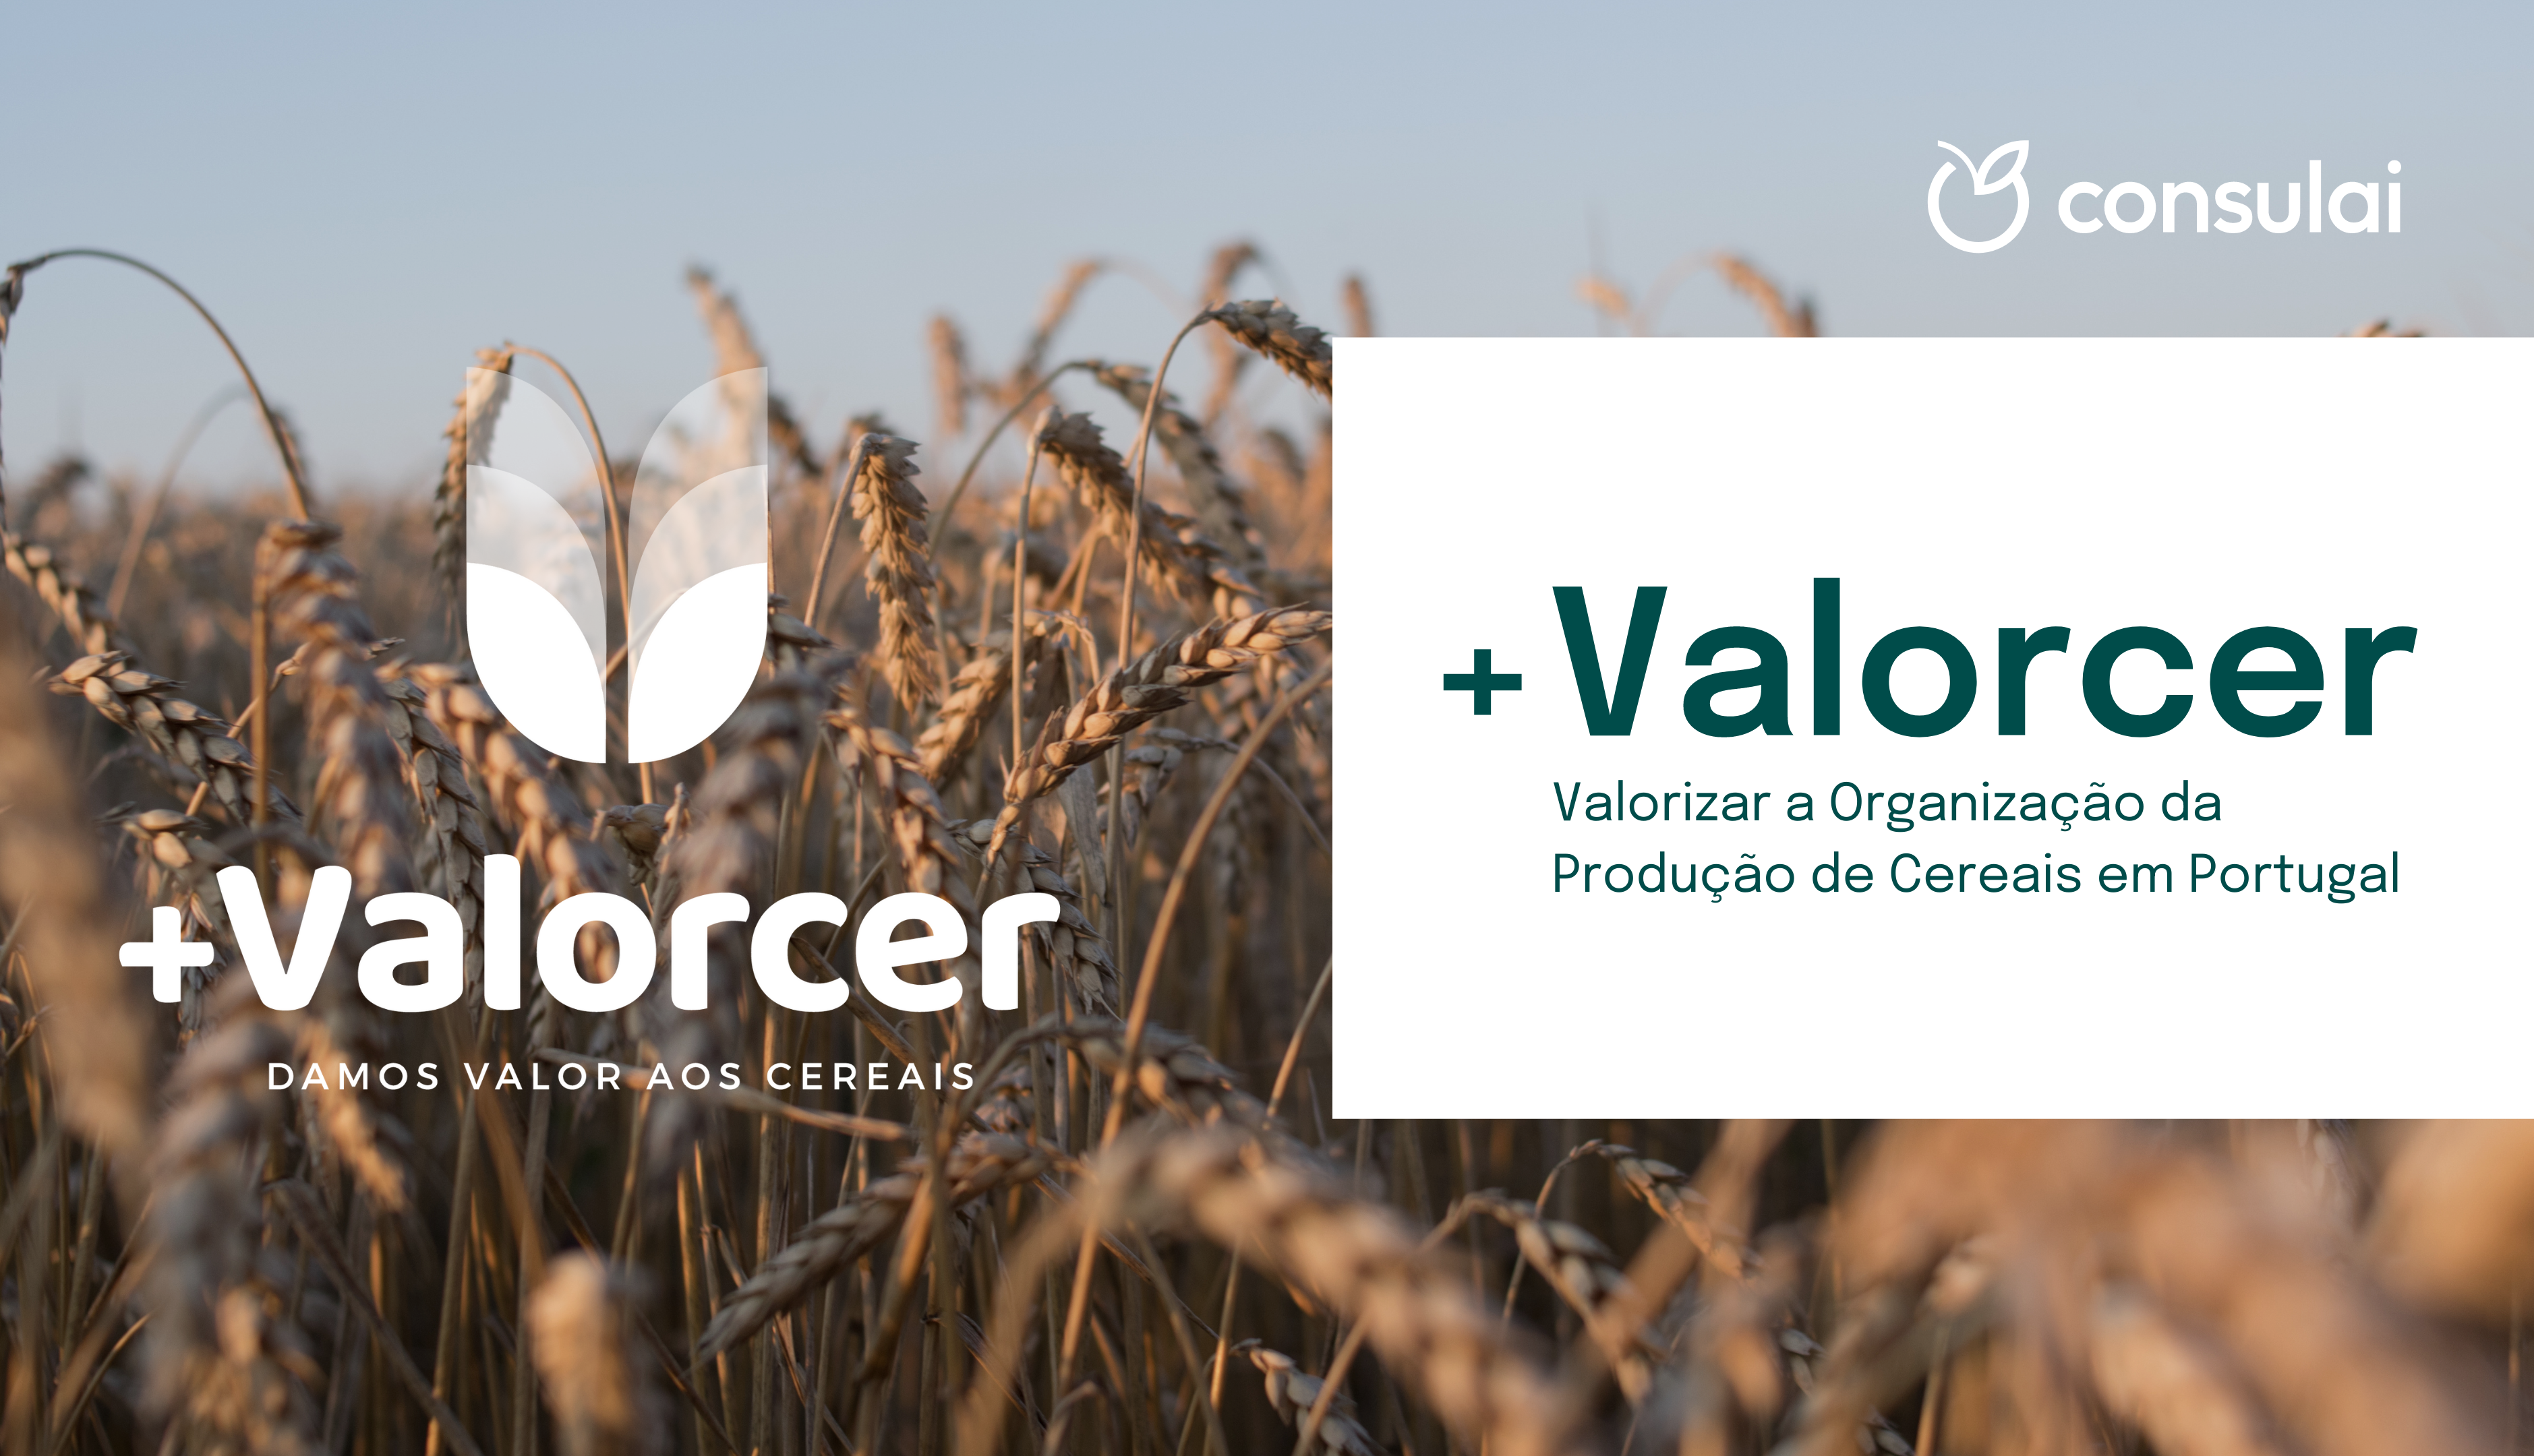 +VALORCER: Enhancing the organization of cereal production in Portugal